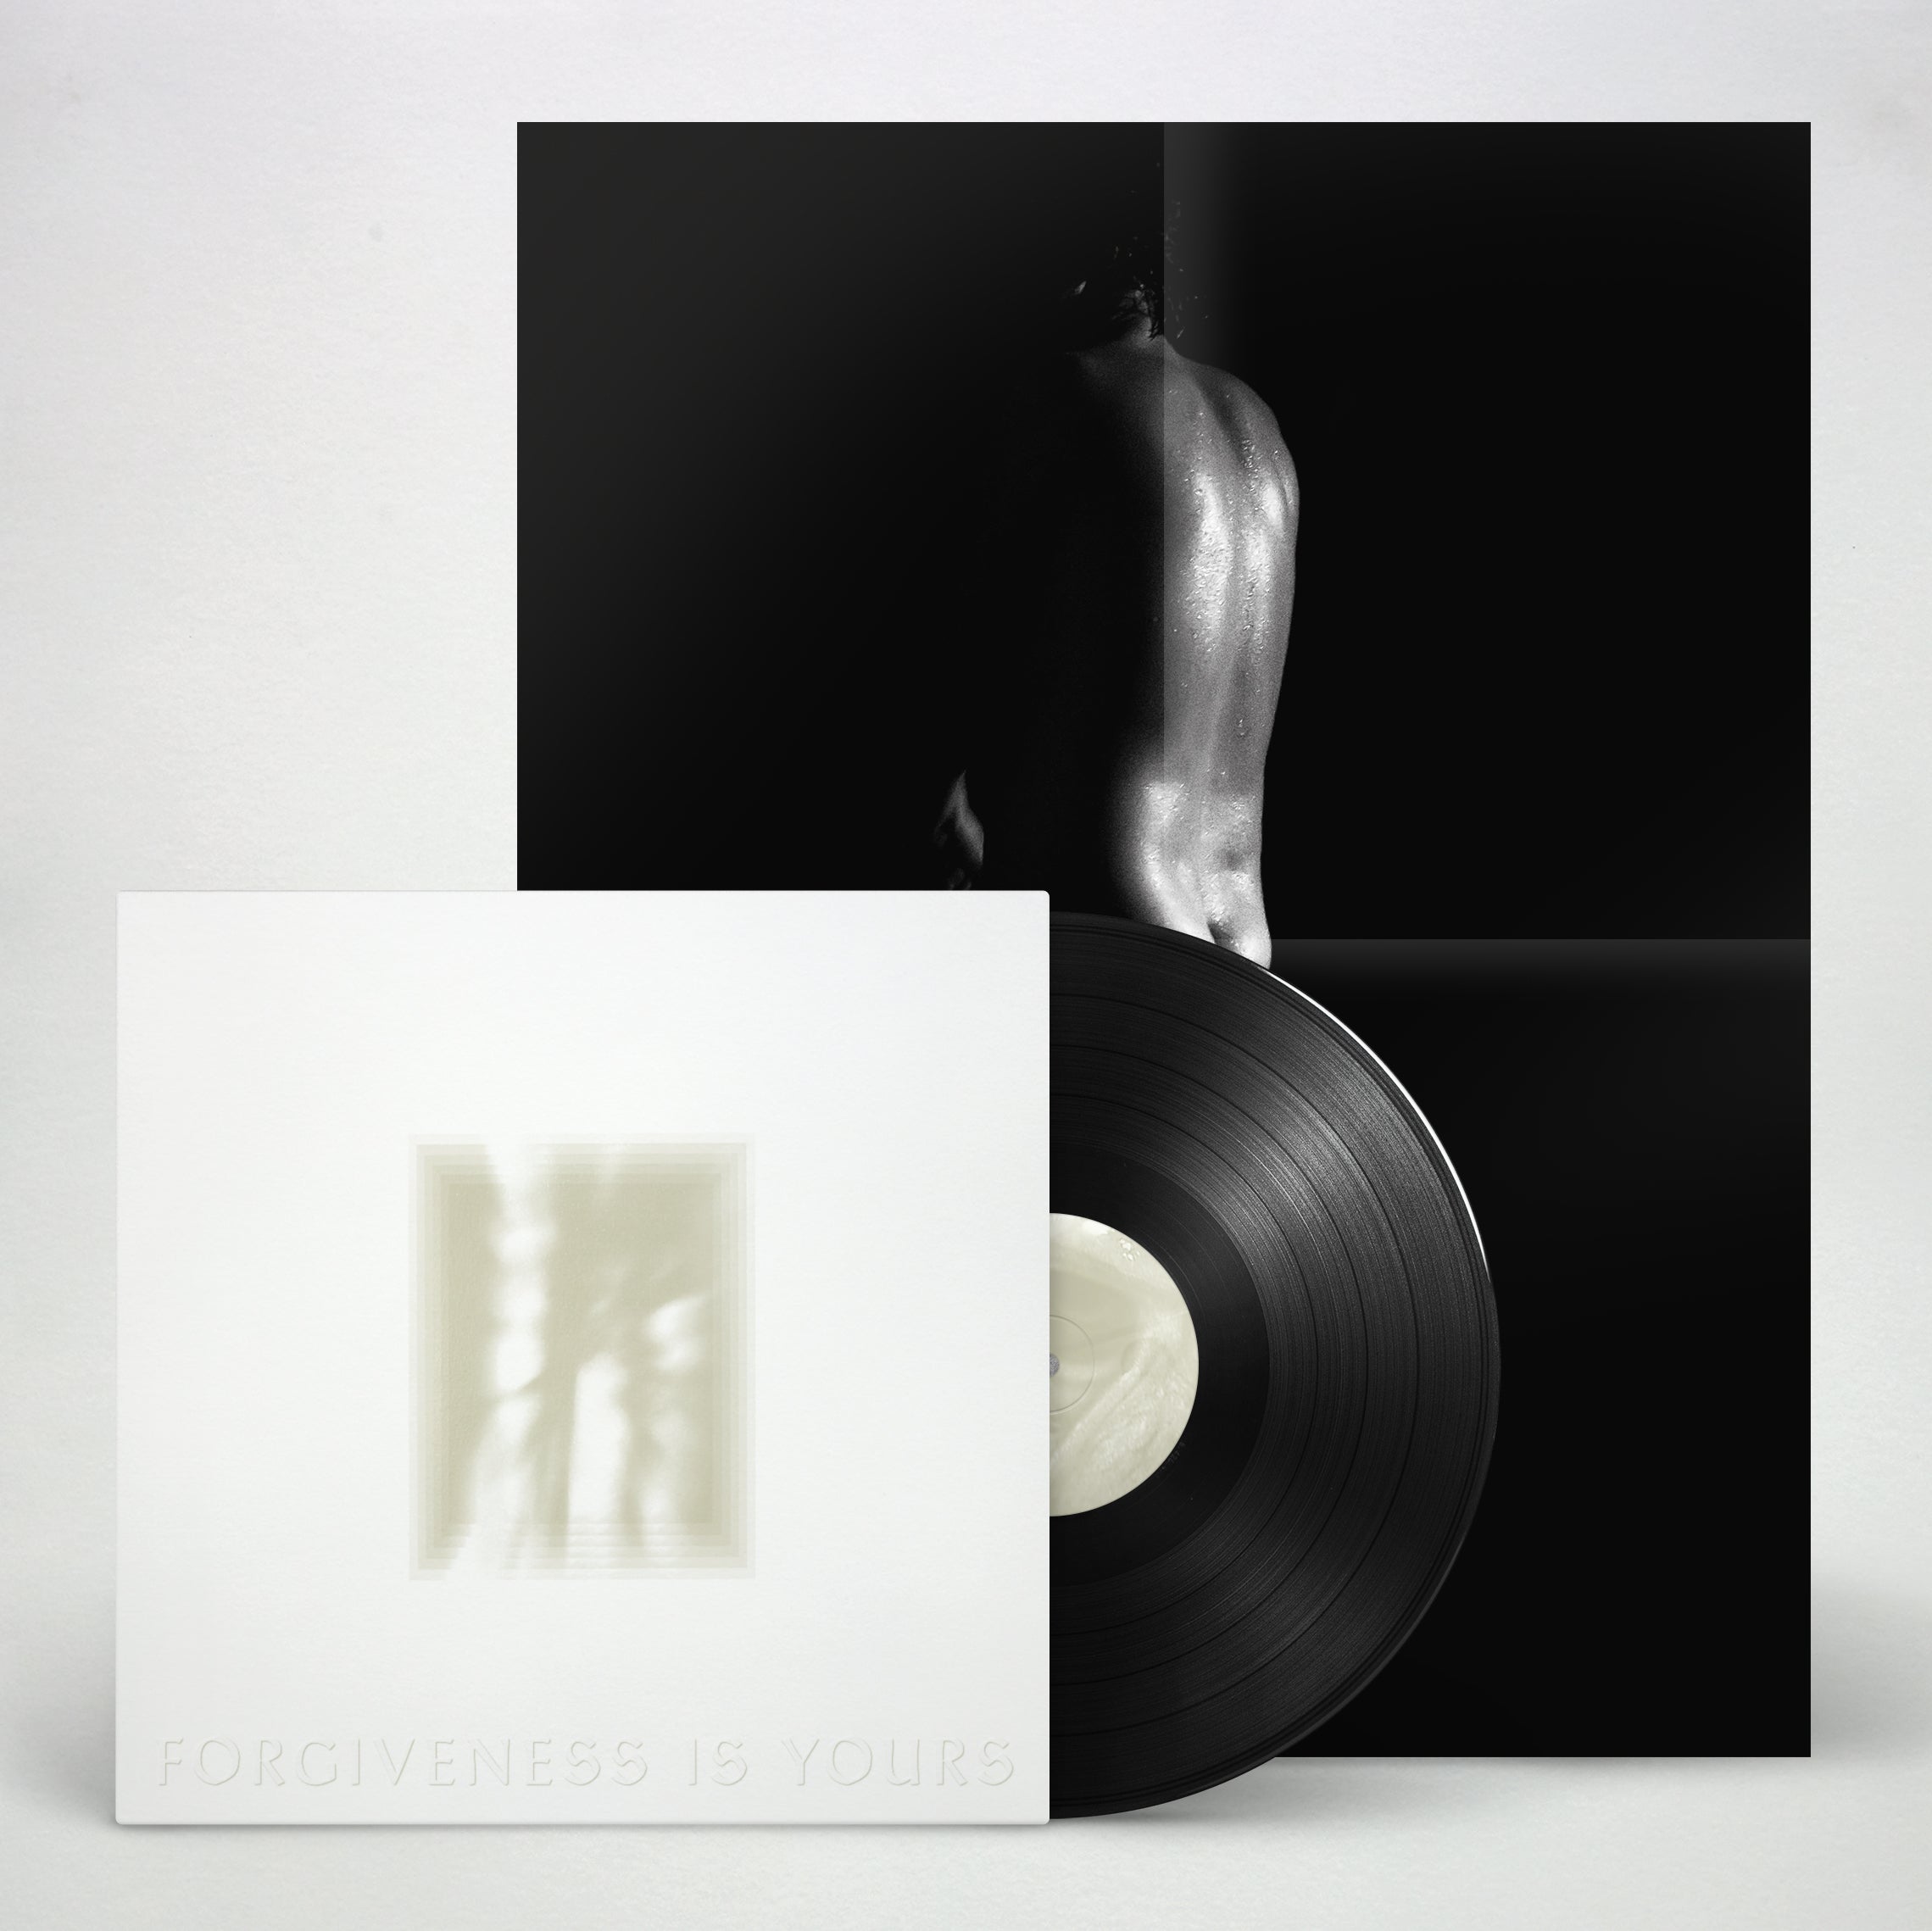 Ultrasound - Everything Picture (Vinyl Re-issue / Boxset, One